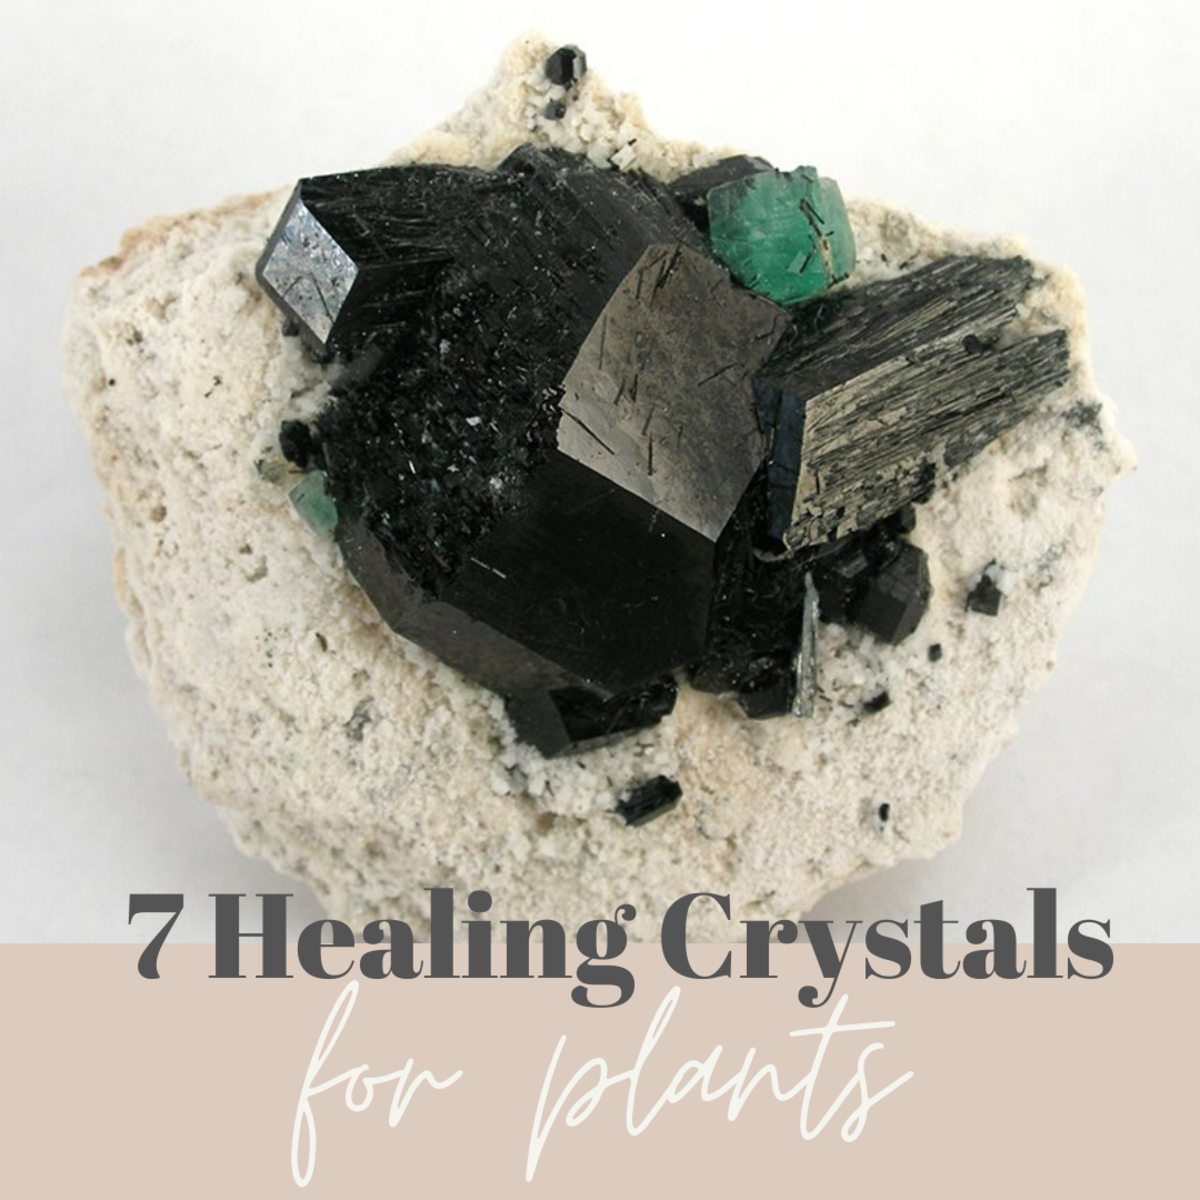 Who knew crystals could heal plants, too?